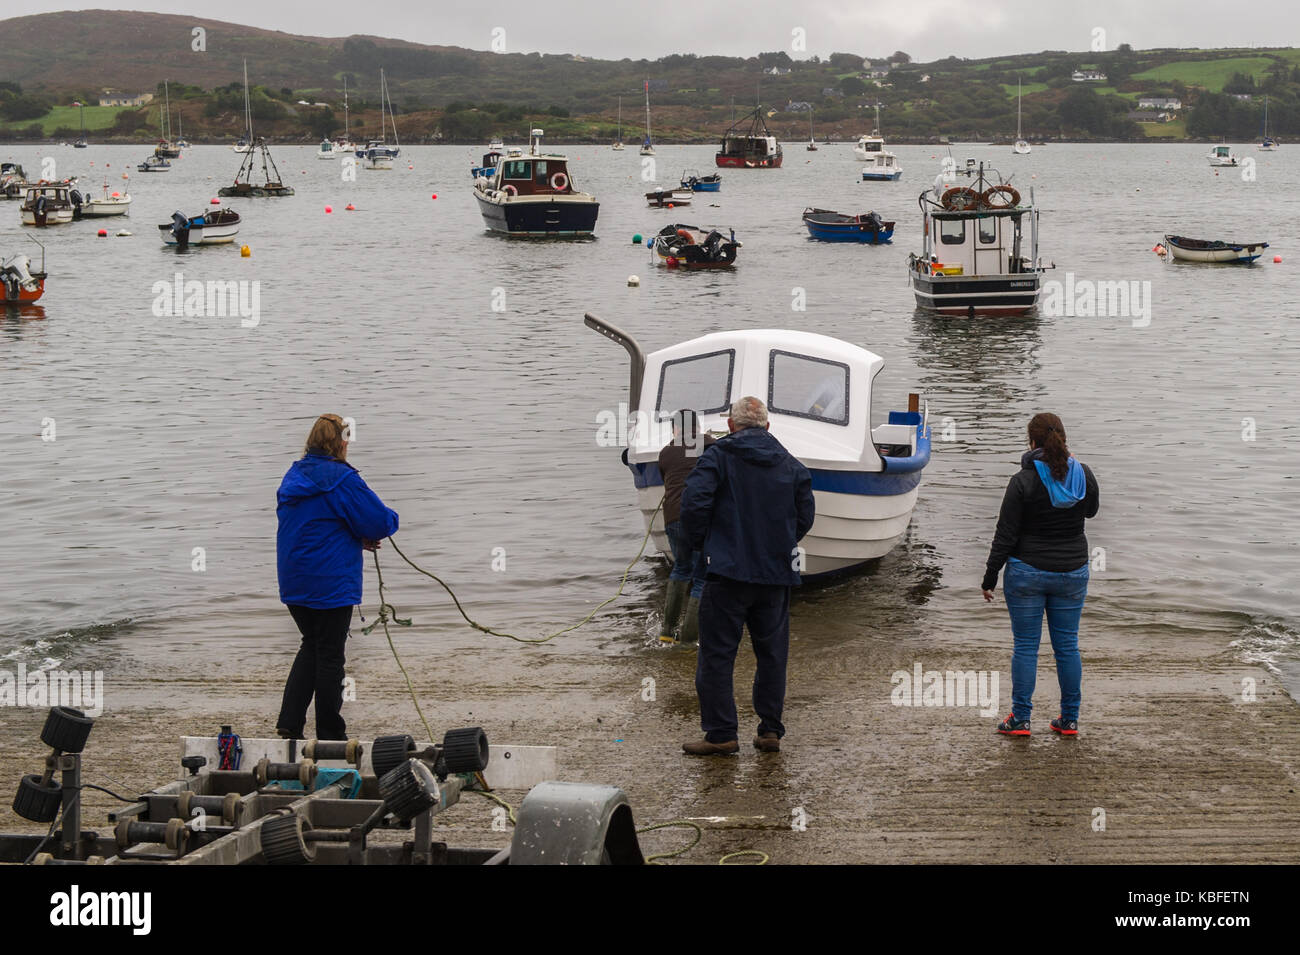 Schull, Ireland. 30th Sept, 2017. Mike Grady of Norfolk based company 'Tactile Boats' hands over a new 'Tactile 21' boat to his customer in Schull, Ireland during a miserable and overcast Saturday morning. Credit: Andy Gibson/Alamy Live News. Stock Photo